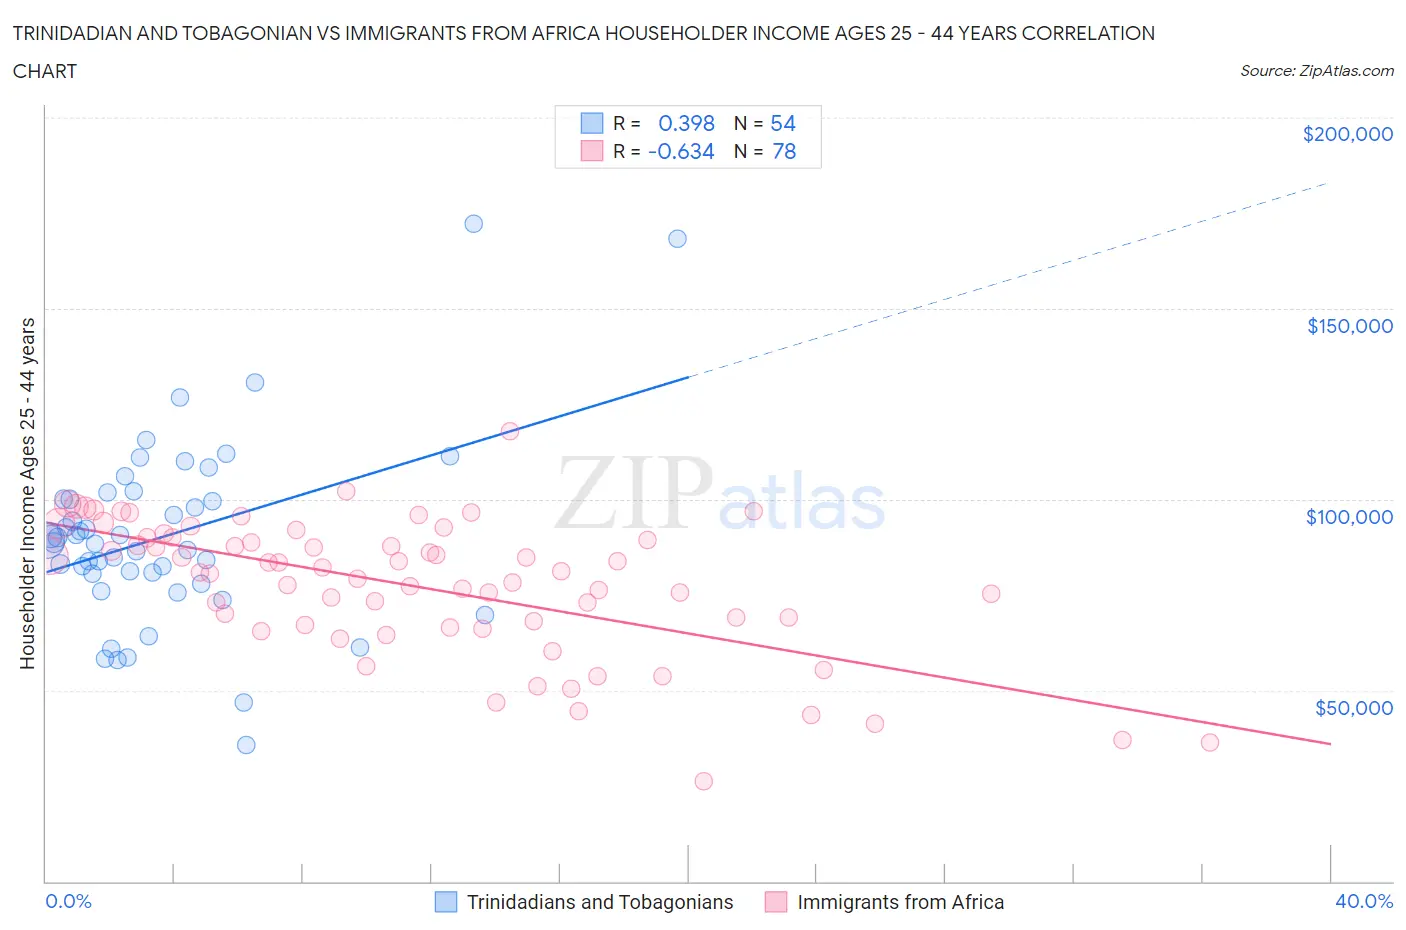 Trinidadian and Tobagonian vs Immigrants from Africa Householder Income Ages 25 - 44 years